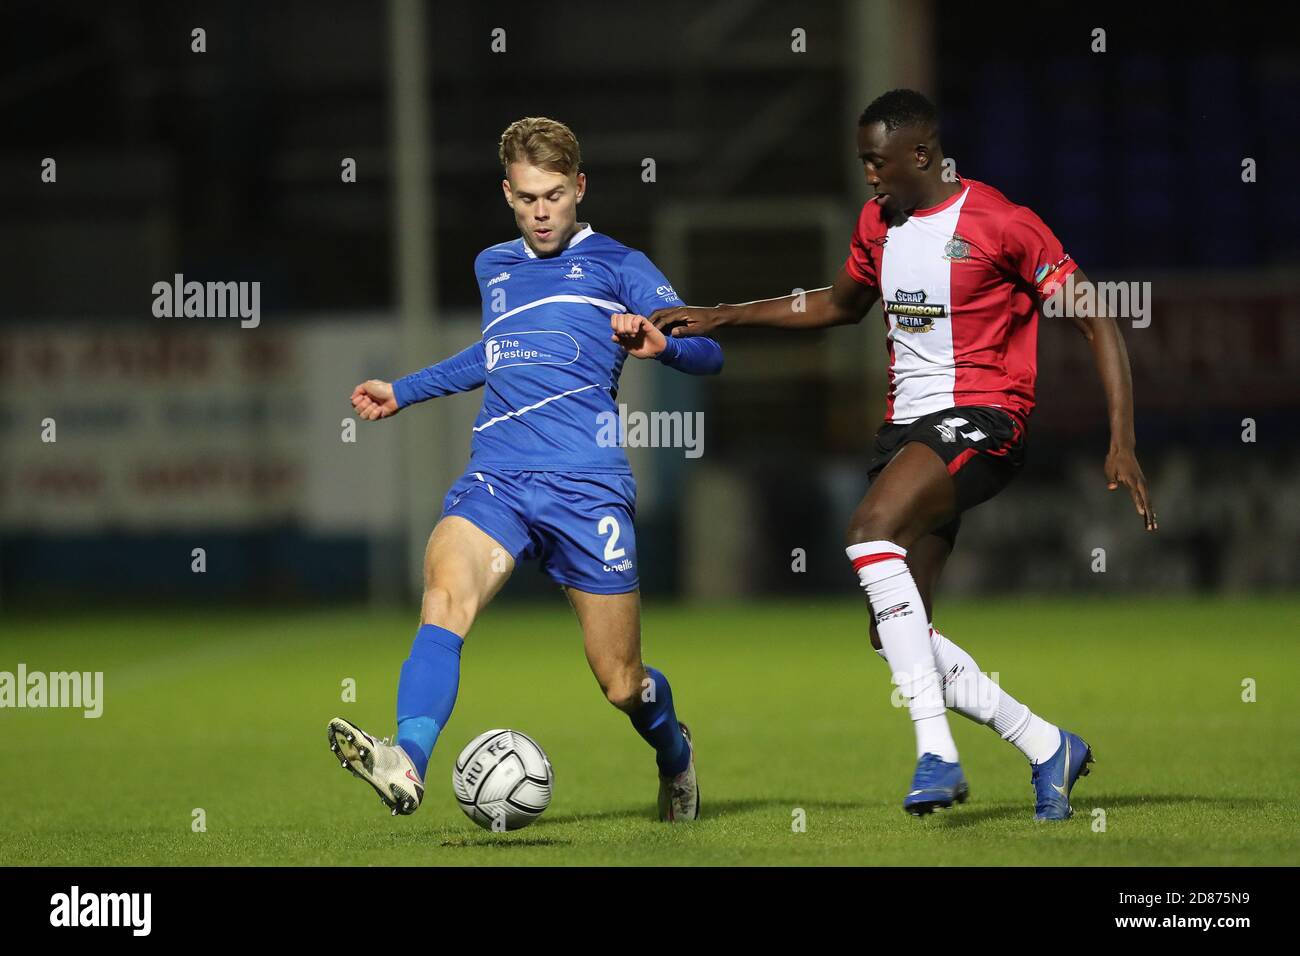 Hartepool, County Durham, UK. 27th Oct 2020. Lewis Cass of Hartlepool United  in action with Altrincham's Yusifu Ceesay during the Vanarama National  League match between Hartlepool United and Altrincham at Victoria Park